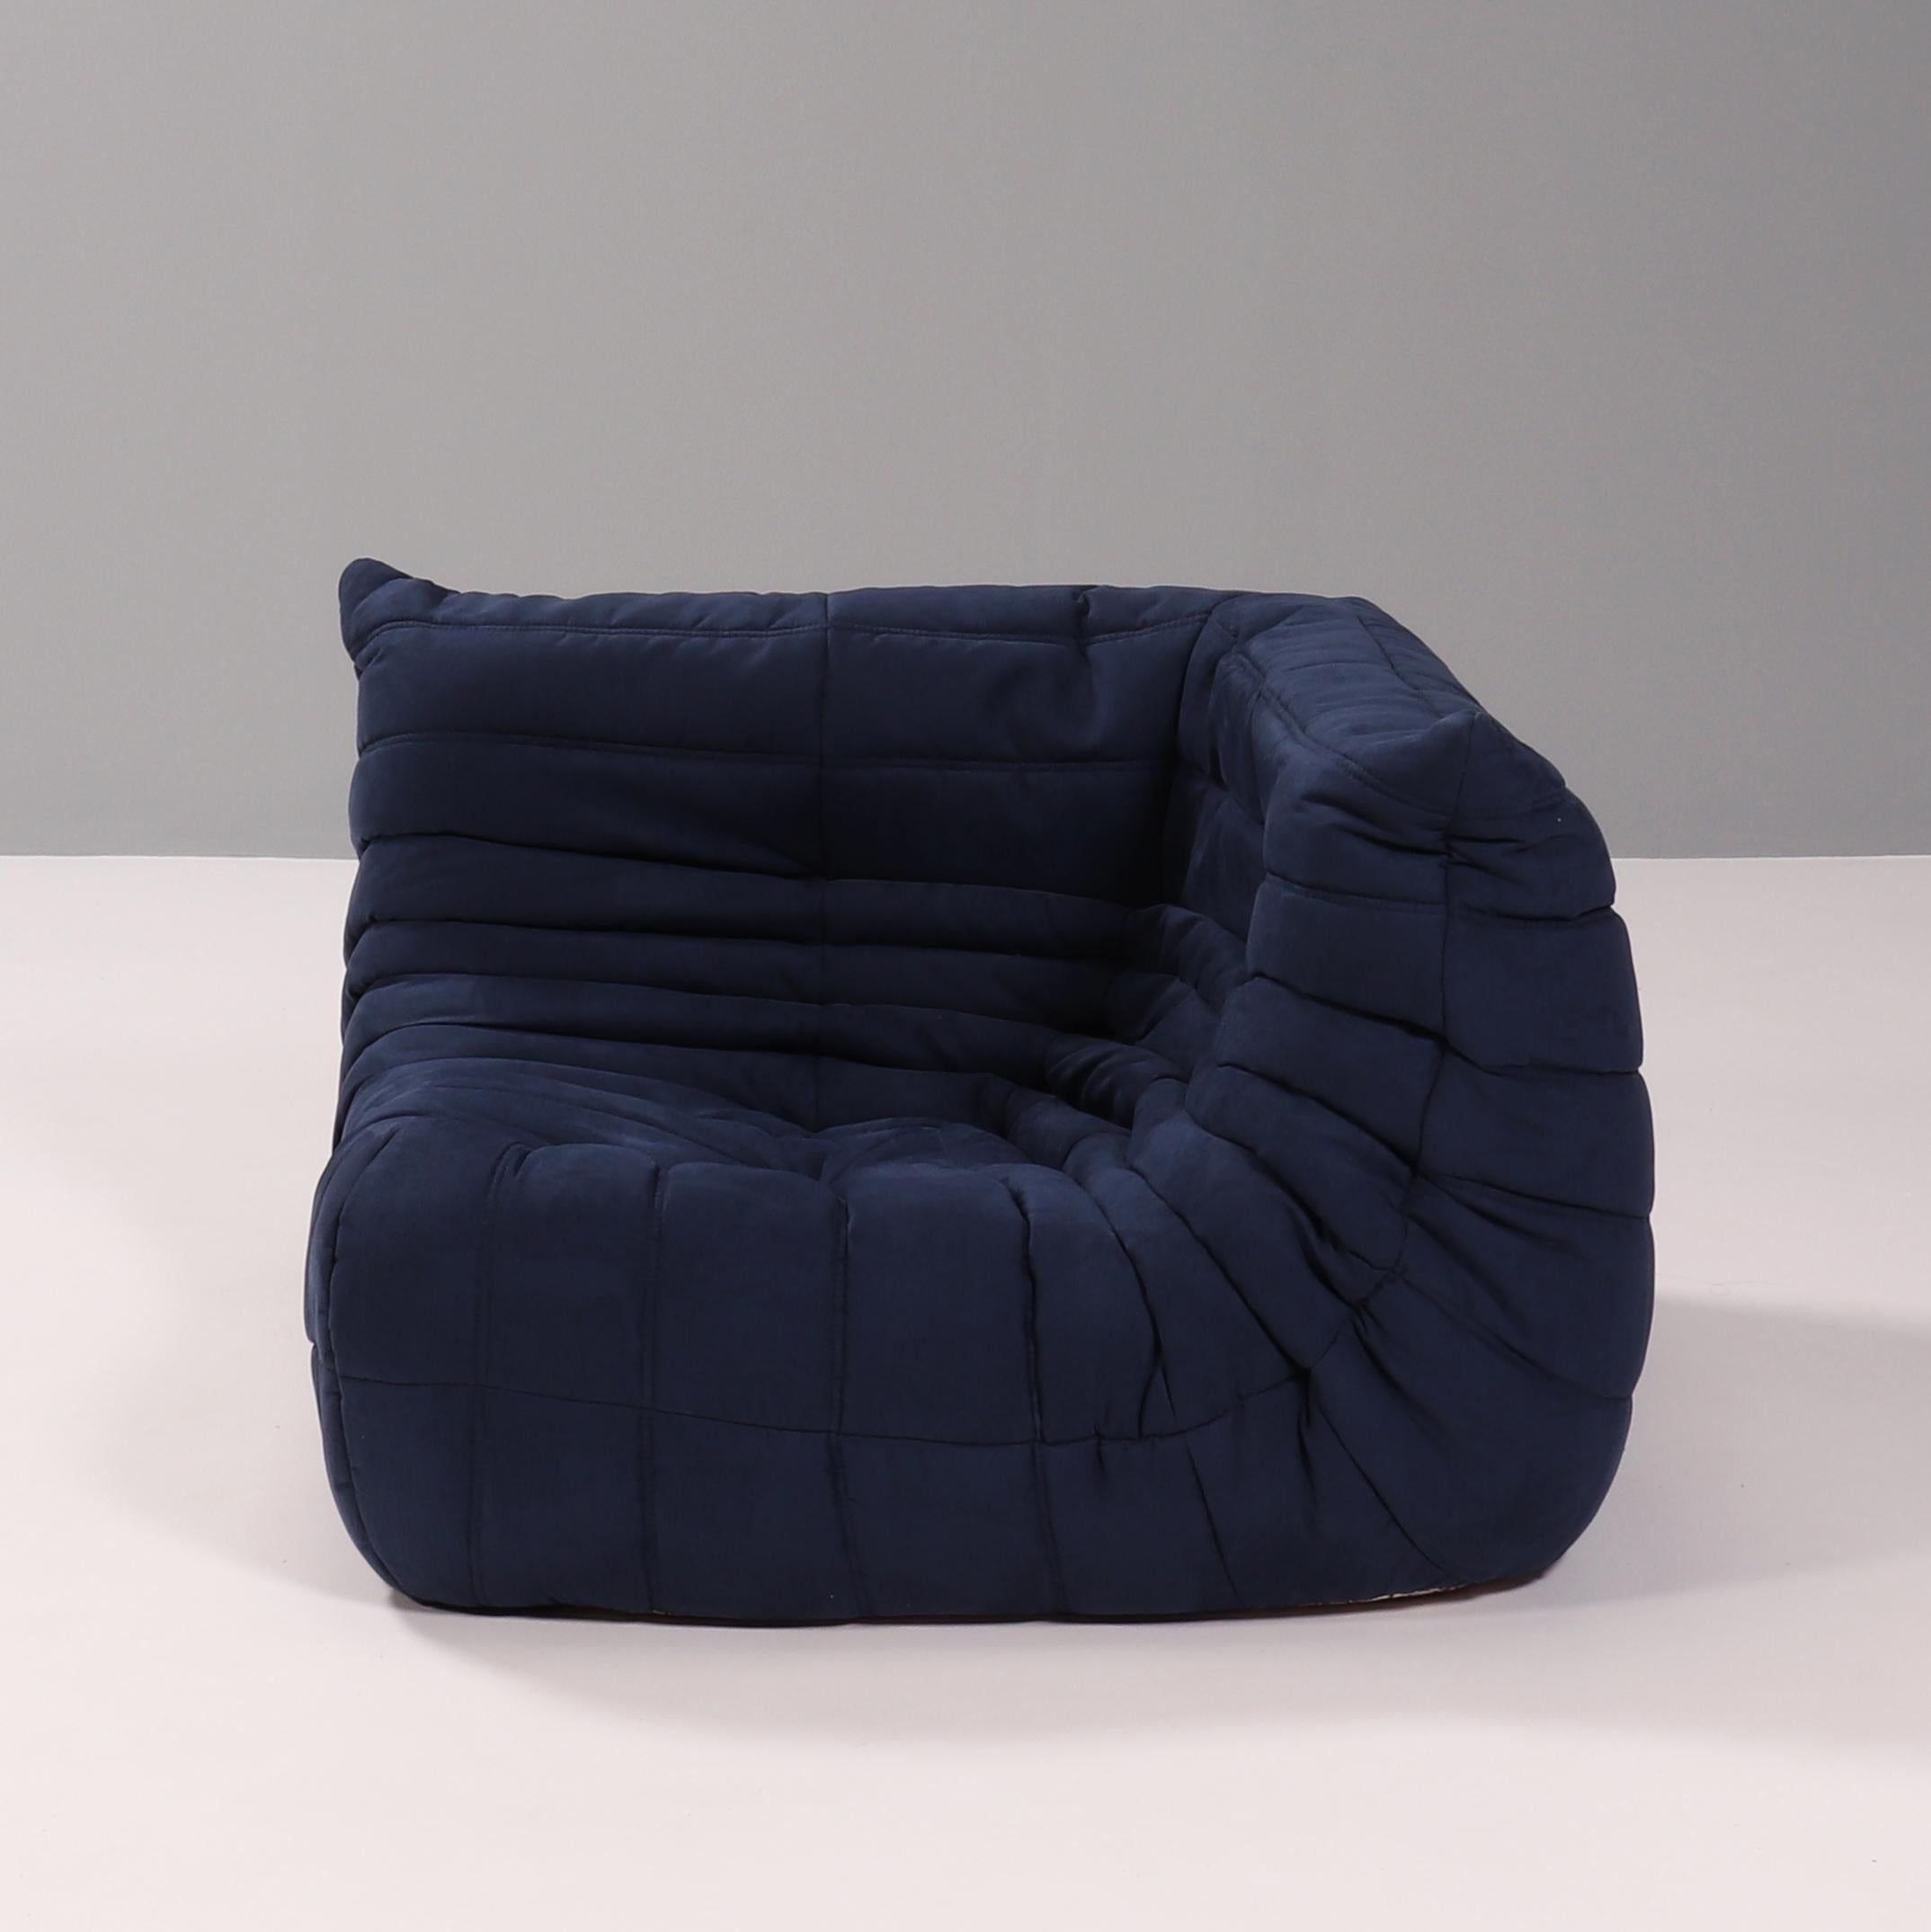 Ligne Roset by Michel Ducaroy Togo Dark Blue Sofa, Set of 3 In Good Condition For Sale In London, GB